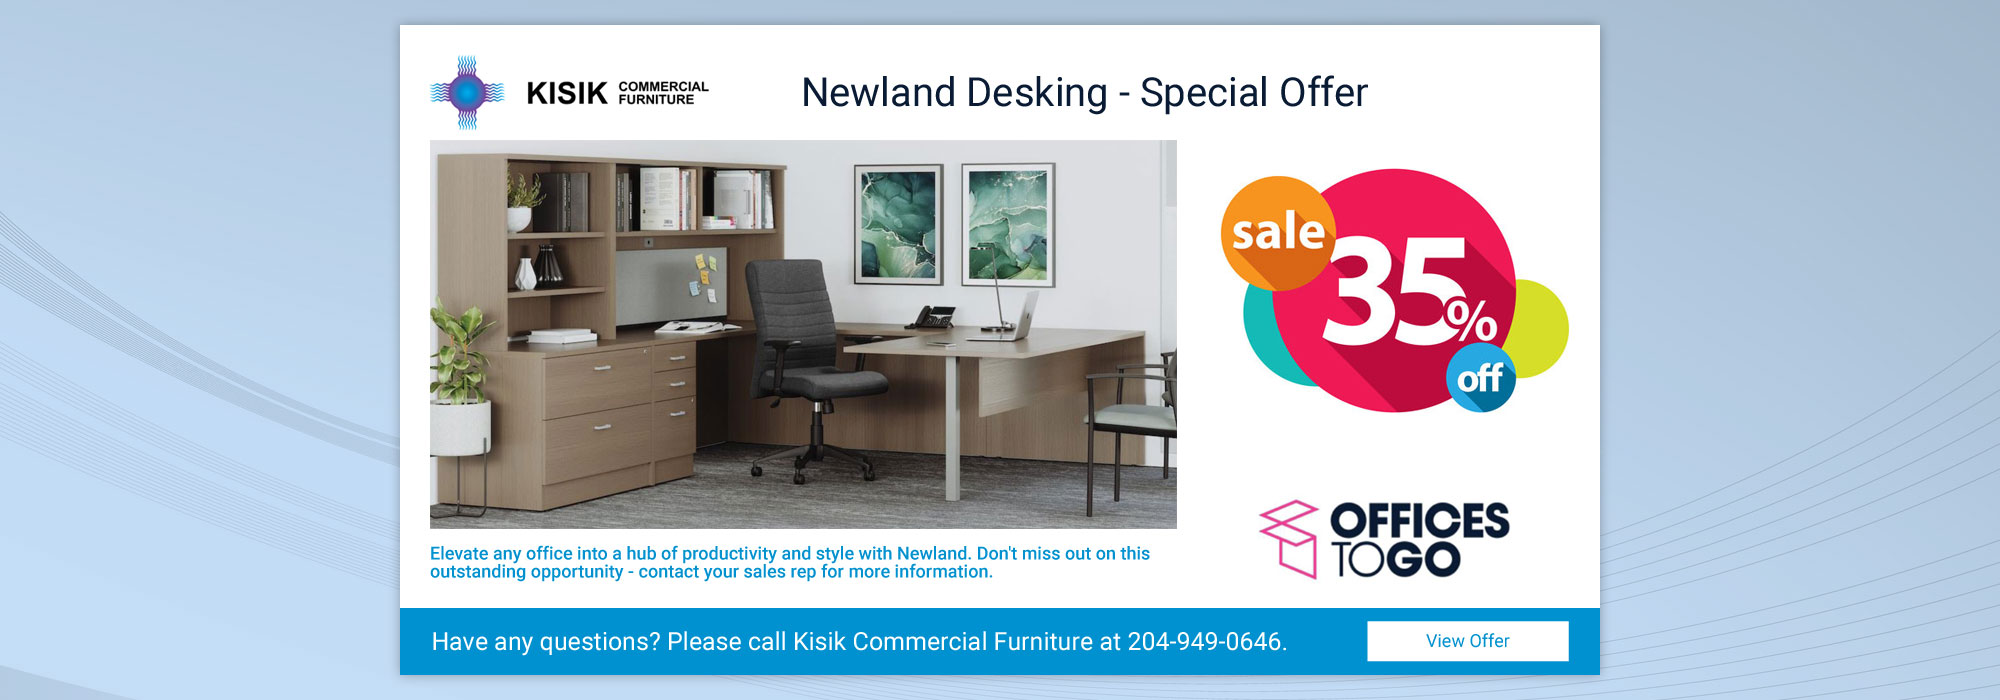 Newland Desking - Special Year End Offer